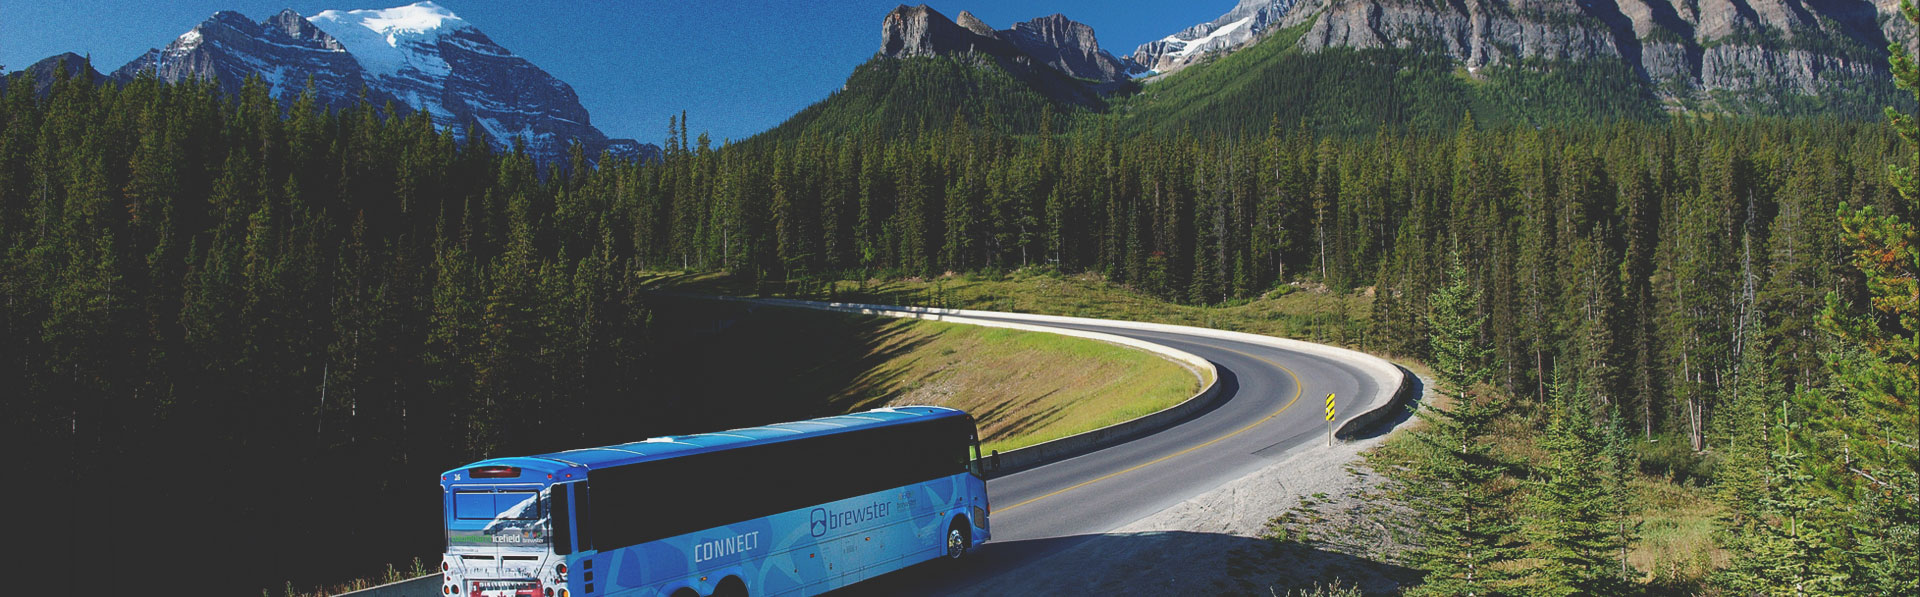 A bus driving through the mountains around Calgary taking people on a tour